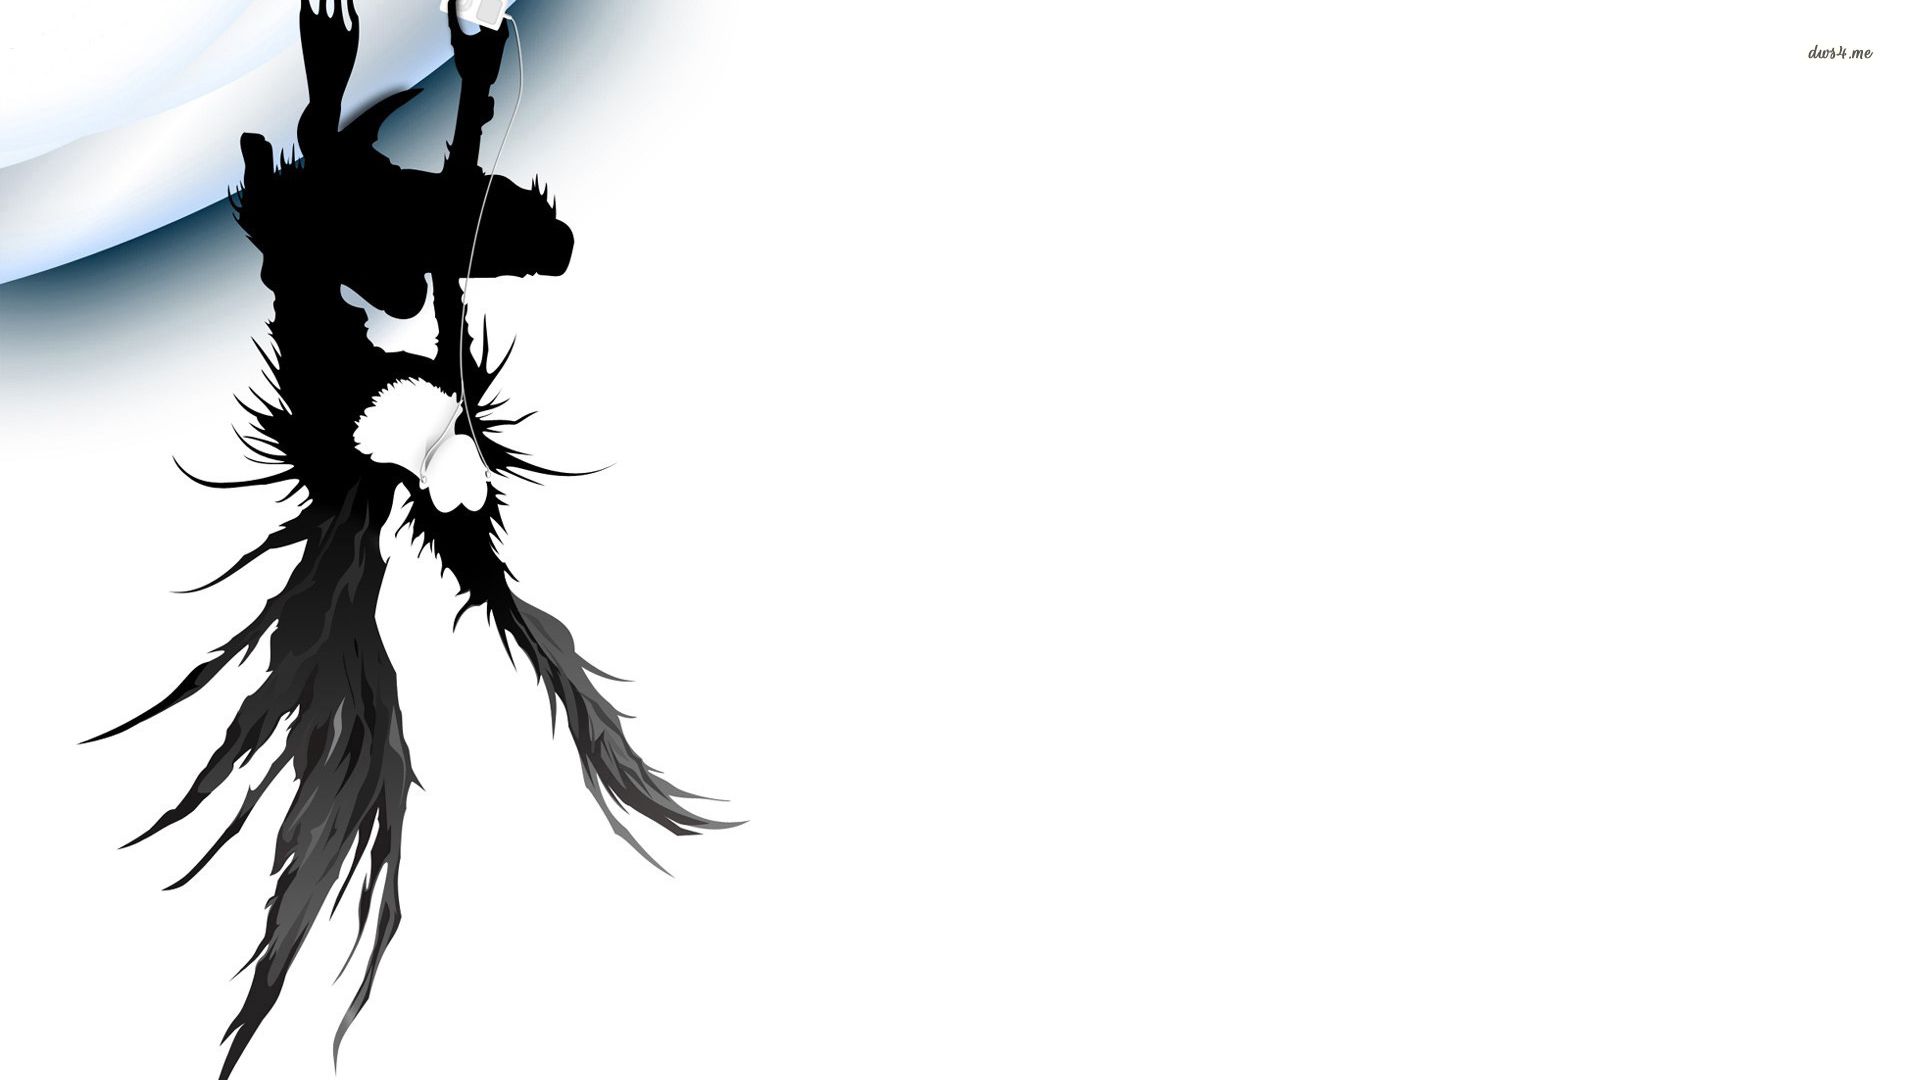 Ryuk - Death Note wallpaper - Anime wallpapers